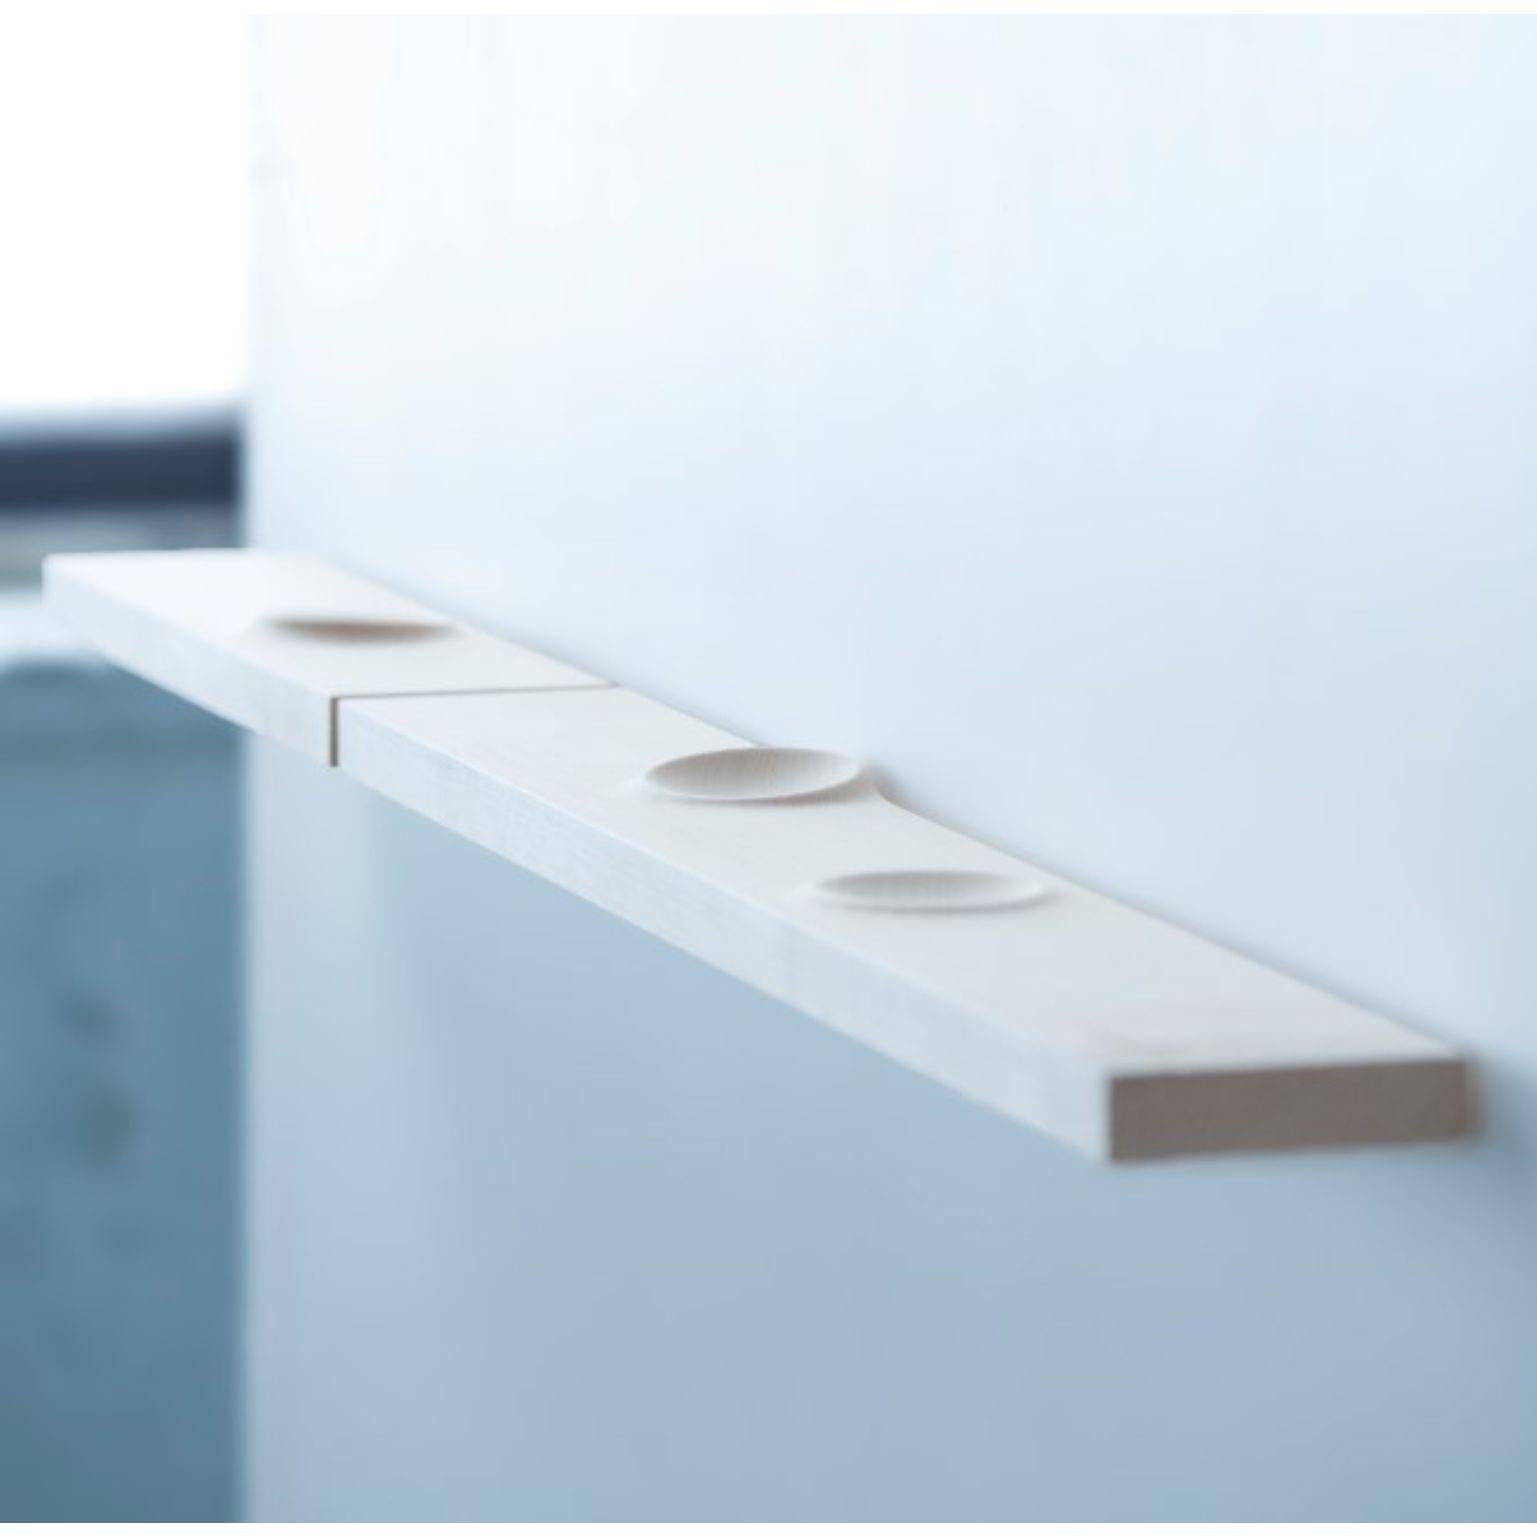 Large plato shelf by Antrei Hartikainen
Materials: maple, natural oil mix
Dimensions: W 75, D 10, H 3,5 cm

Also available: different sizes. 

The surface of the moon is the inspiration for the plato shelf unit with. Keys, jewelry and other